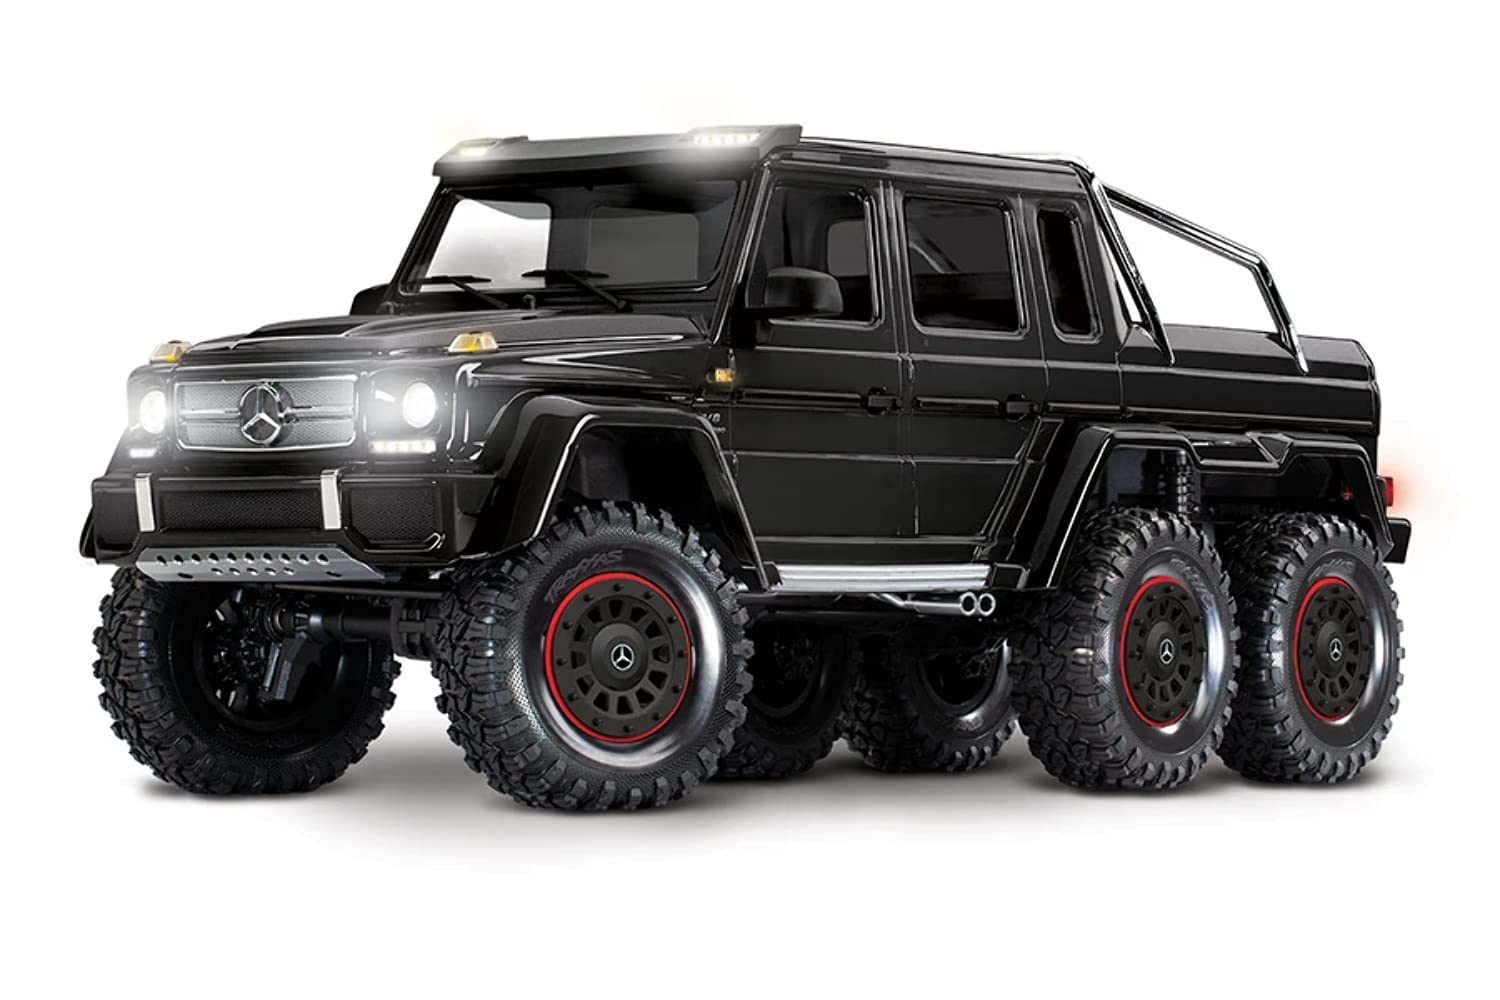 Traxxas Trx-6 Scale And Trail Crawler With Mercedes-Benz G 63 Amg Body: 6X6 Electric Trail Truck With Tqi Link Enabled 24Ghz Rad